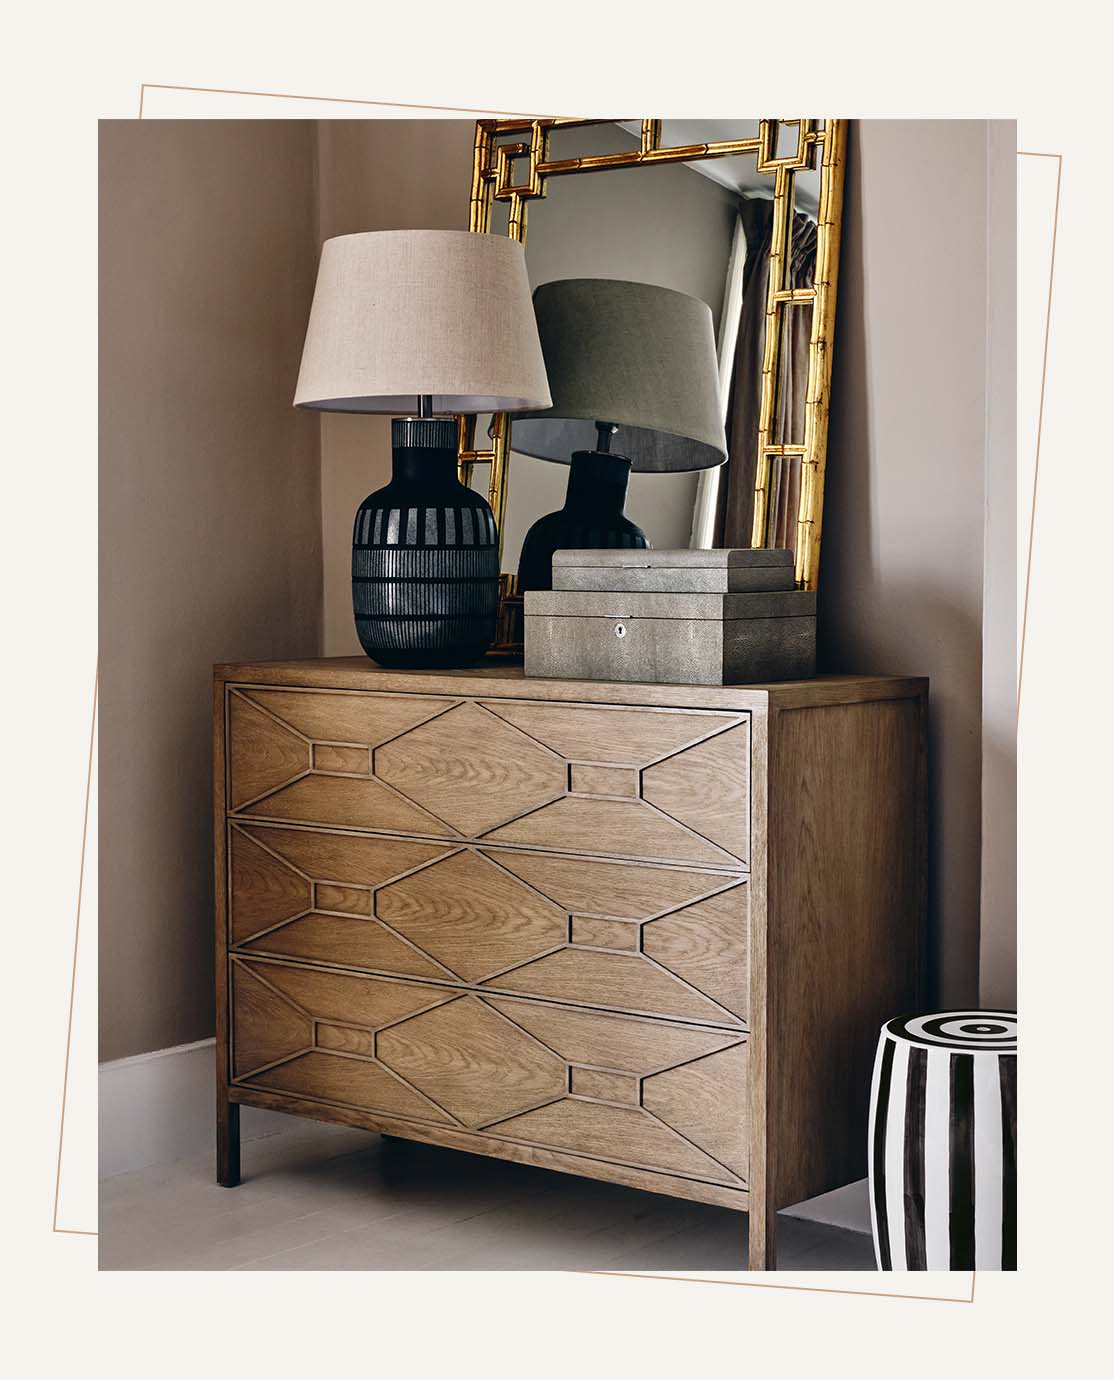 A wooden chest of drawers decorated with diamond panel detailing. A navy patterned lamp and gold mirror sit on top.